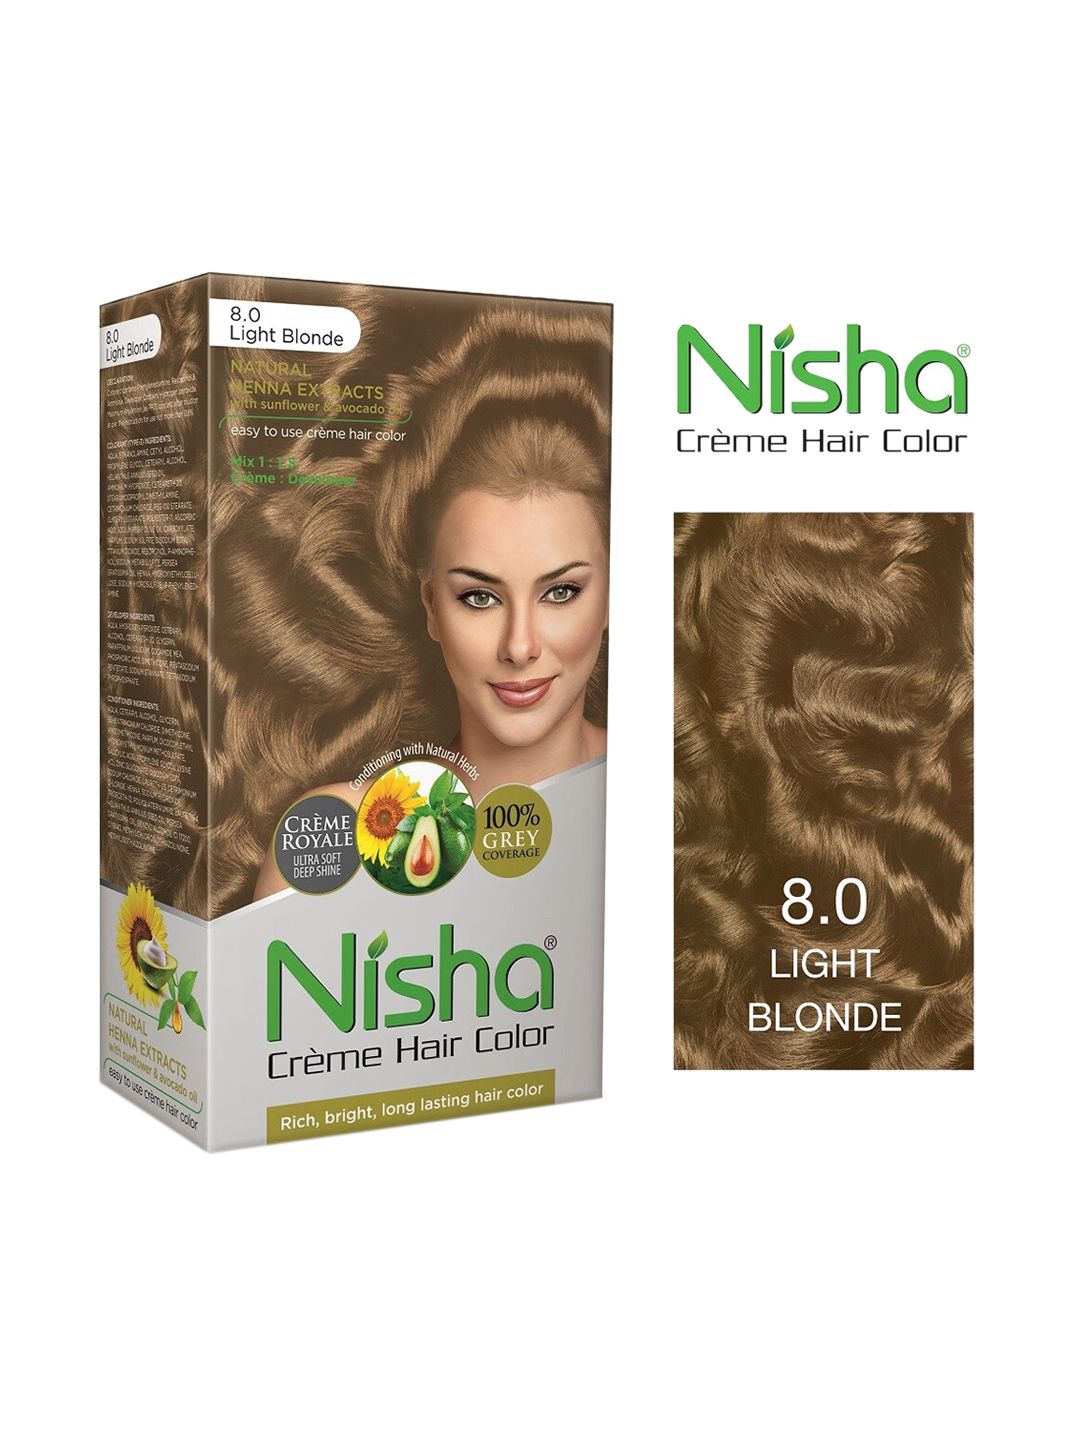 Nisha Unisex Pack of 2 Creme Hair Color 150gm each- Light Blonde Price in India